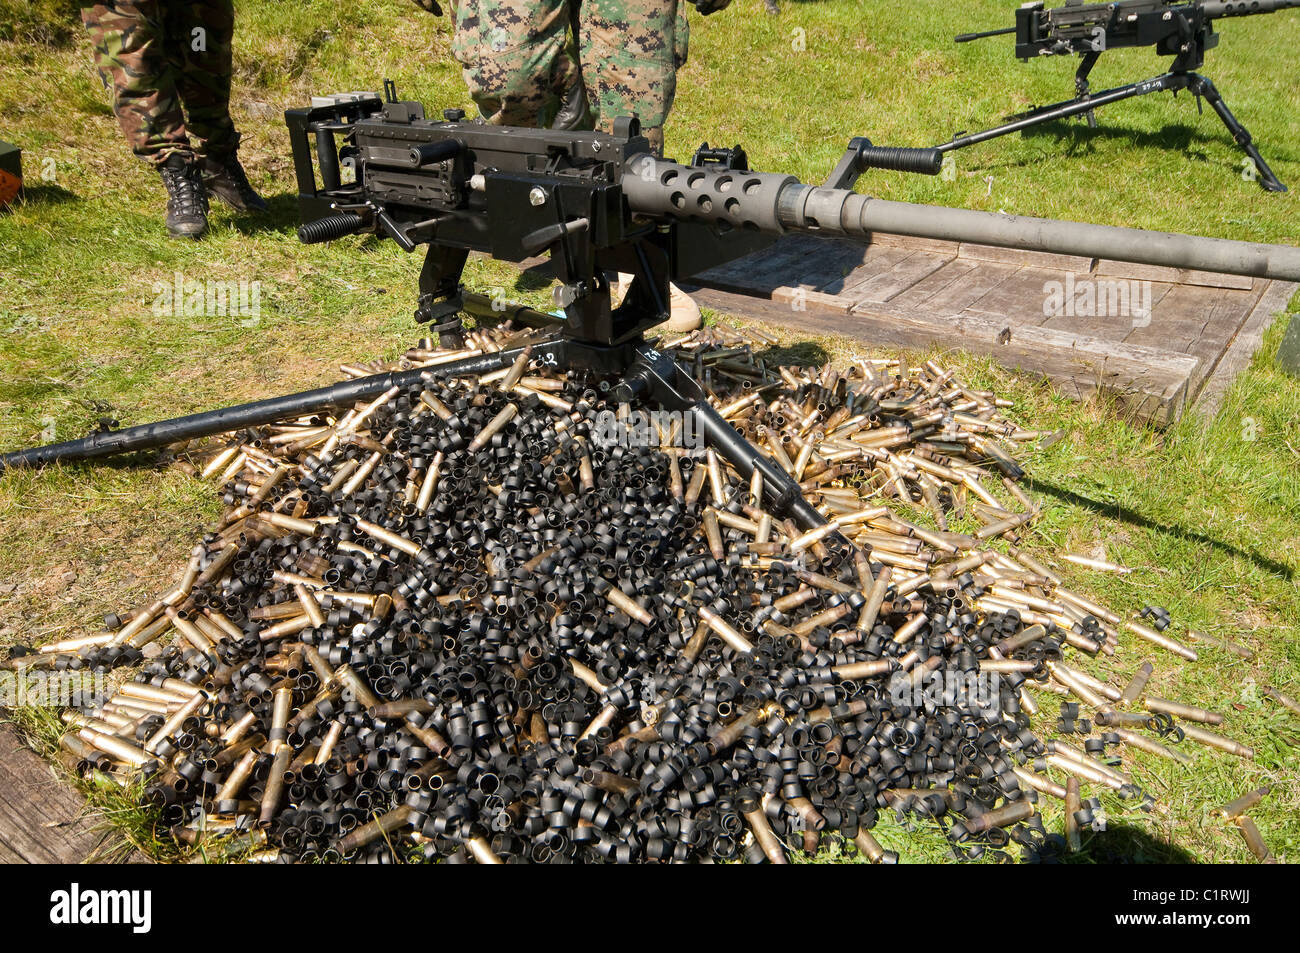 A 50 Caliber Browning Machine Gun With A Pile Of Spent Cases And Stock